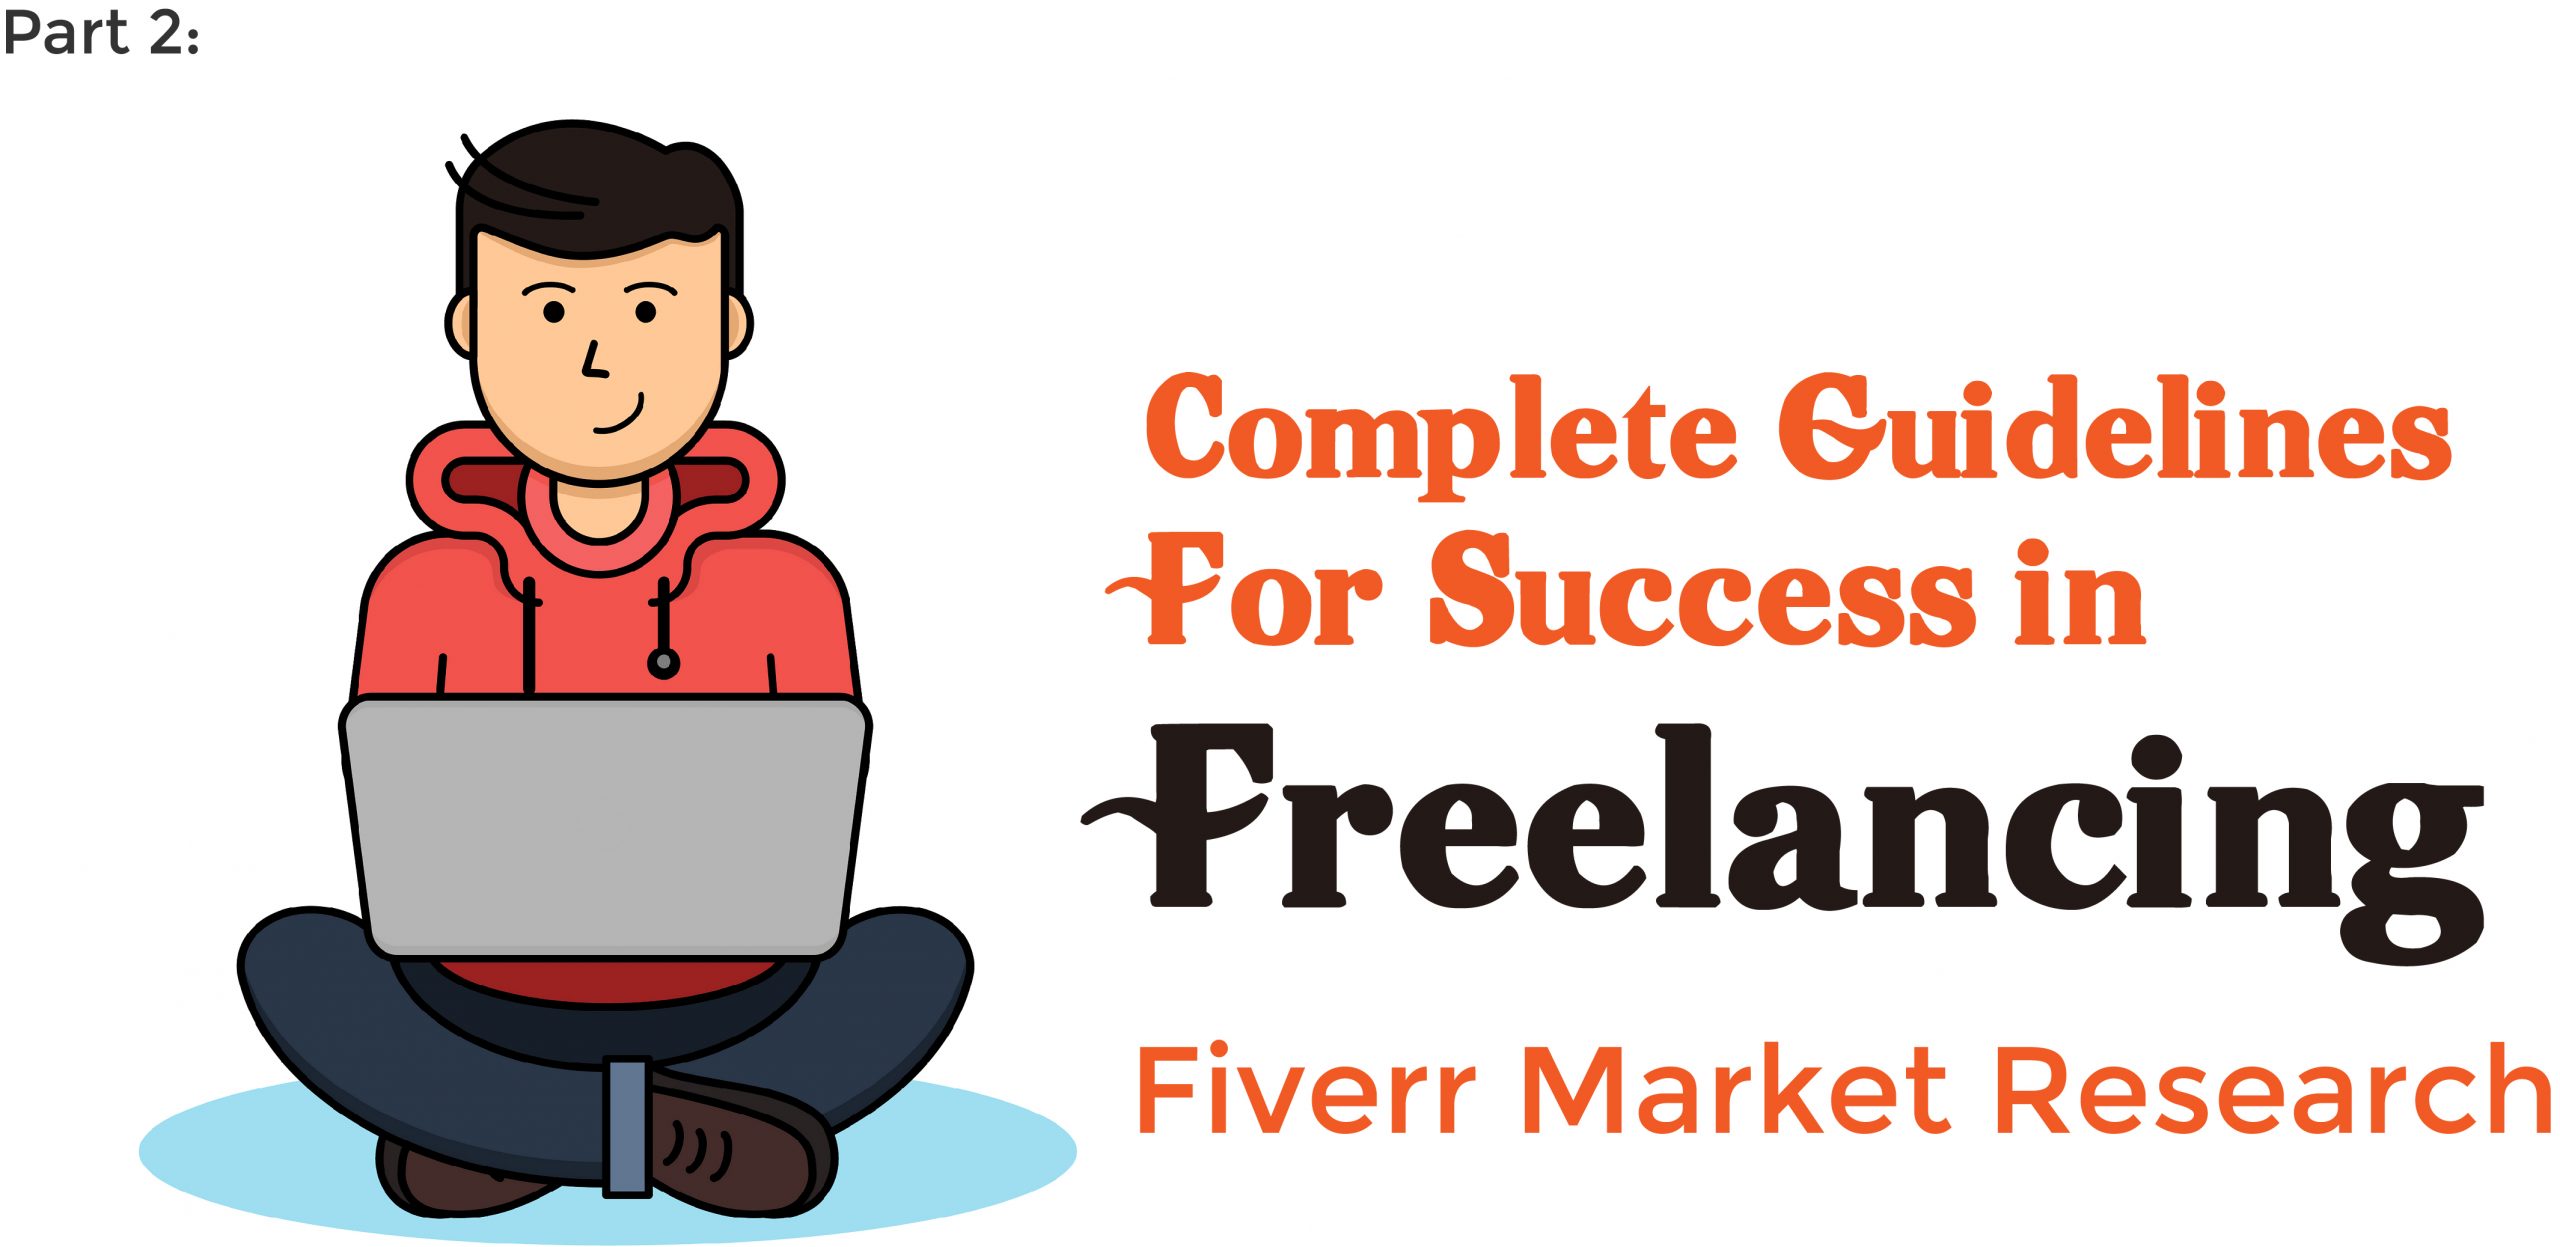 Complete Guidelines for Success in Freelancing - Fiverr Market Research